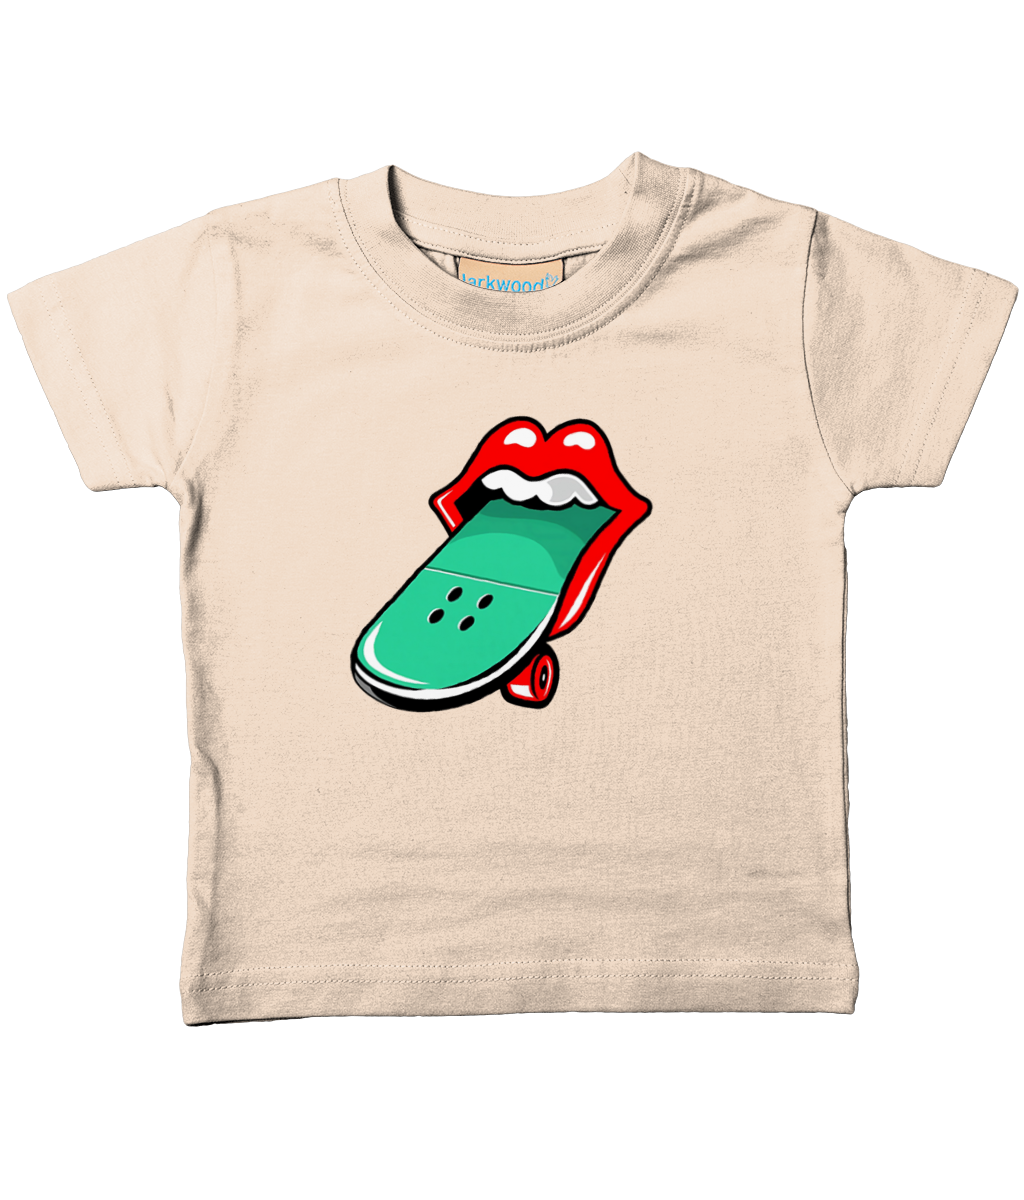 Rock and Roll, Mixing Iconic Rock and Awesome Skate Design, Organic Cotton Toddler Tee